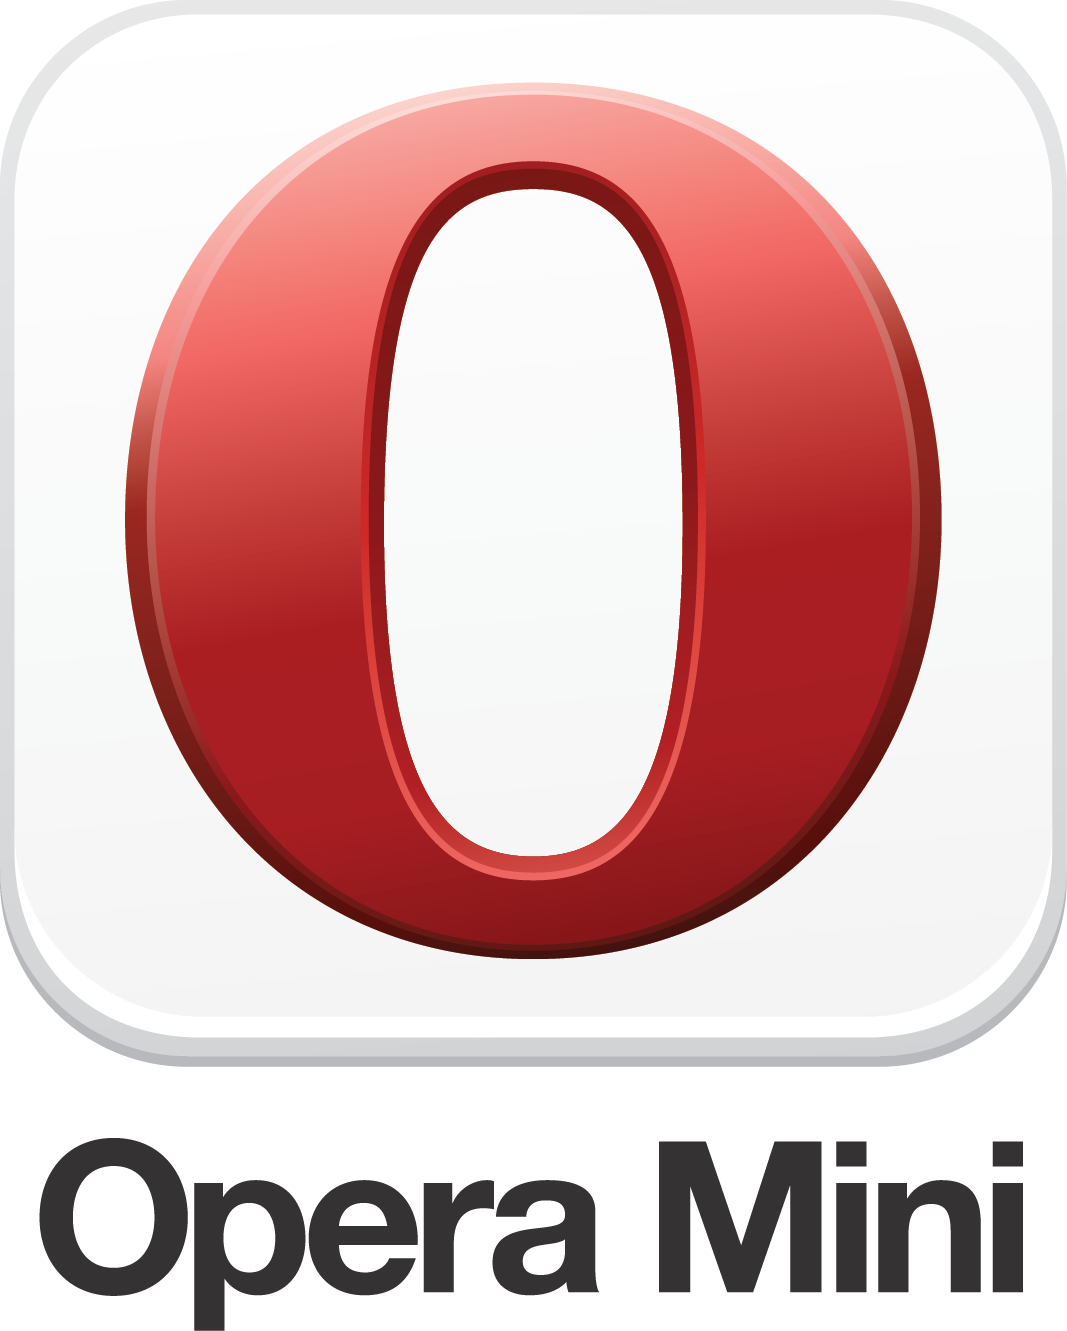 Opera Mini 7.5.3.apk for android free download - Download Full Version Softwares & Games For Free